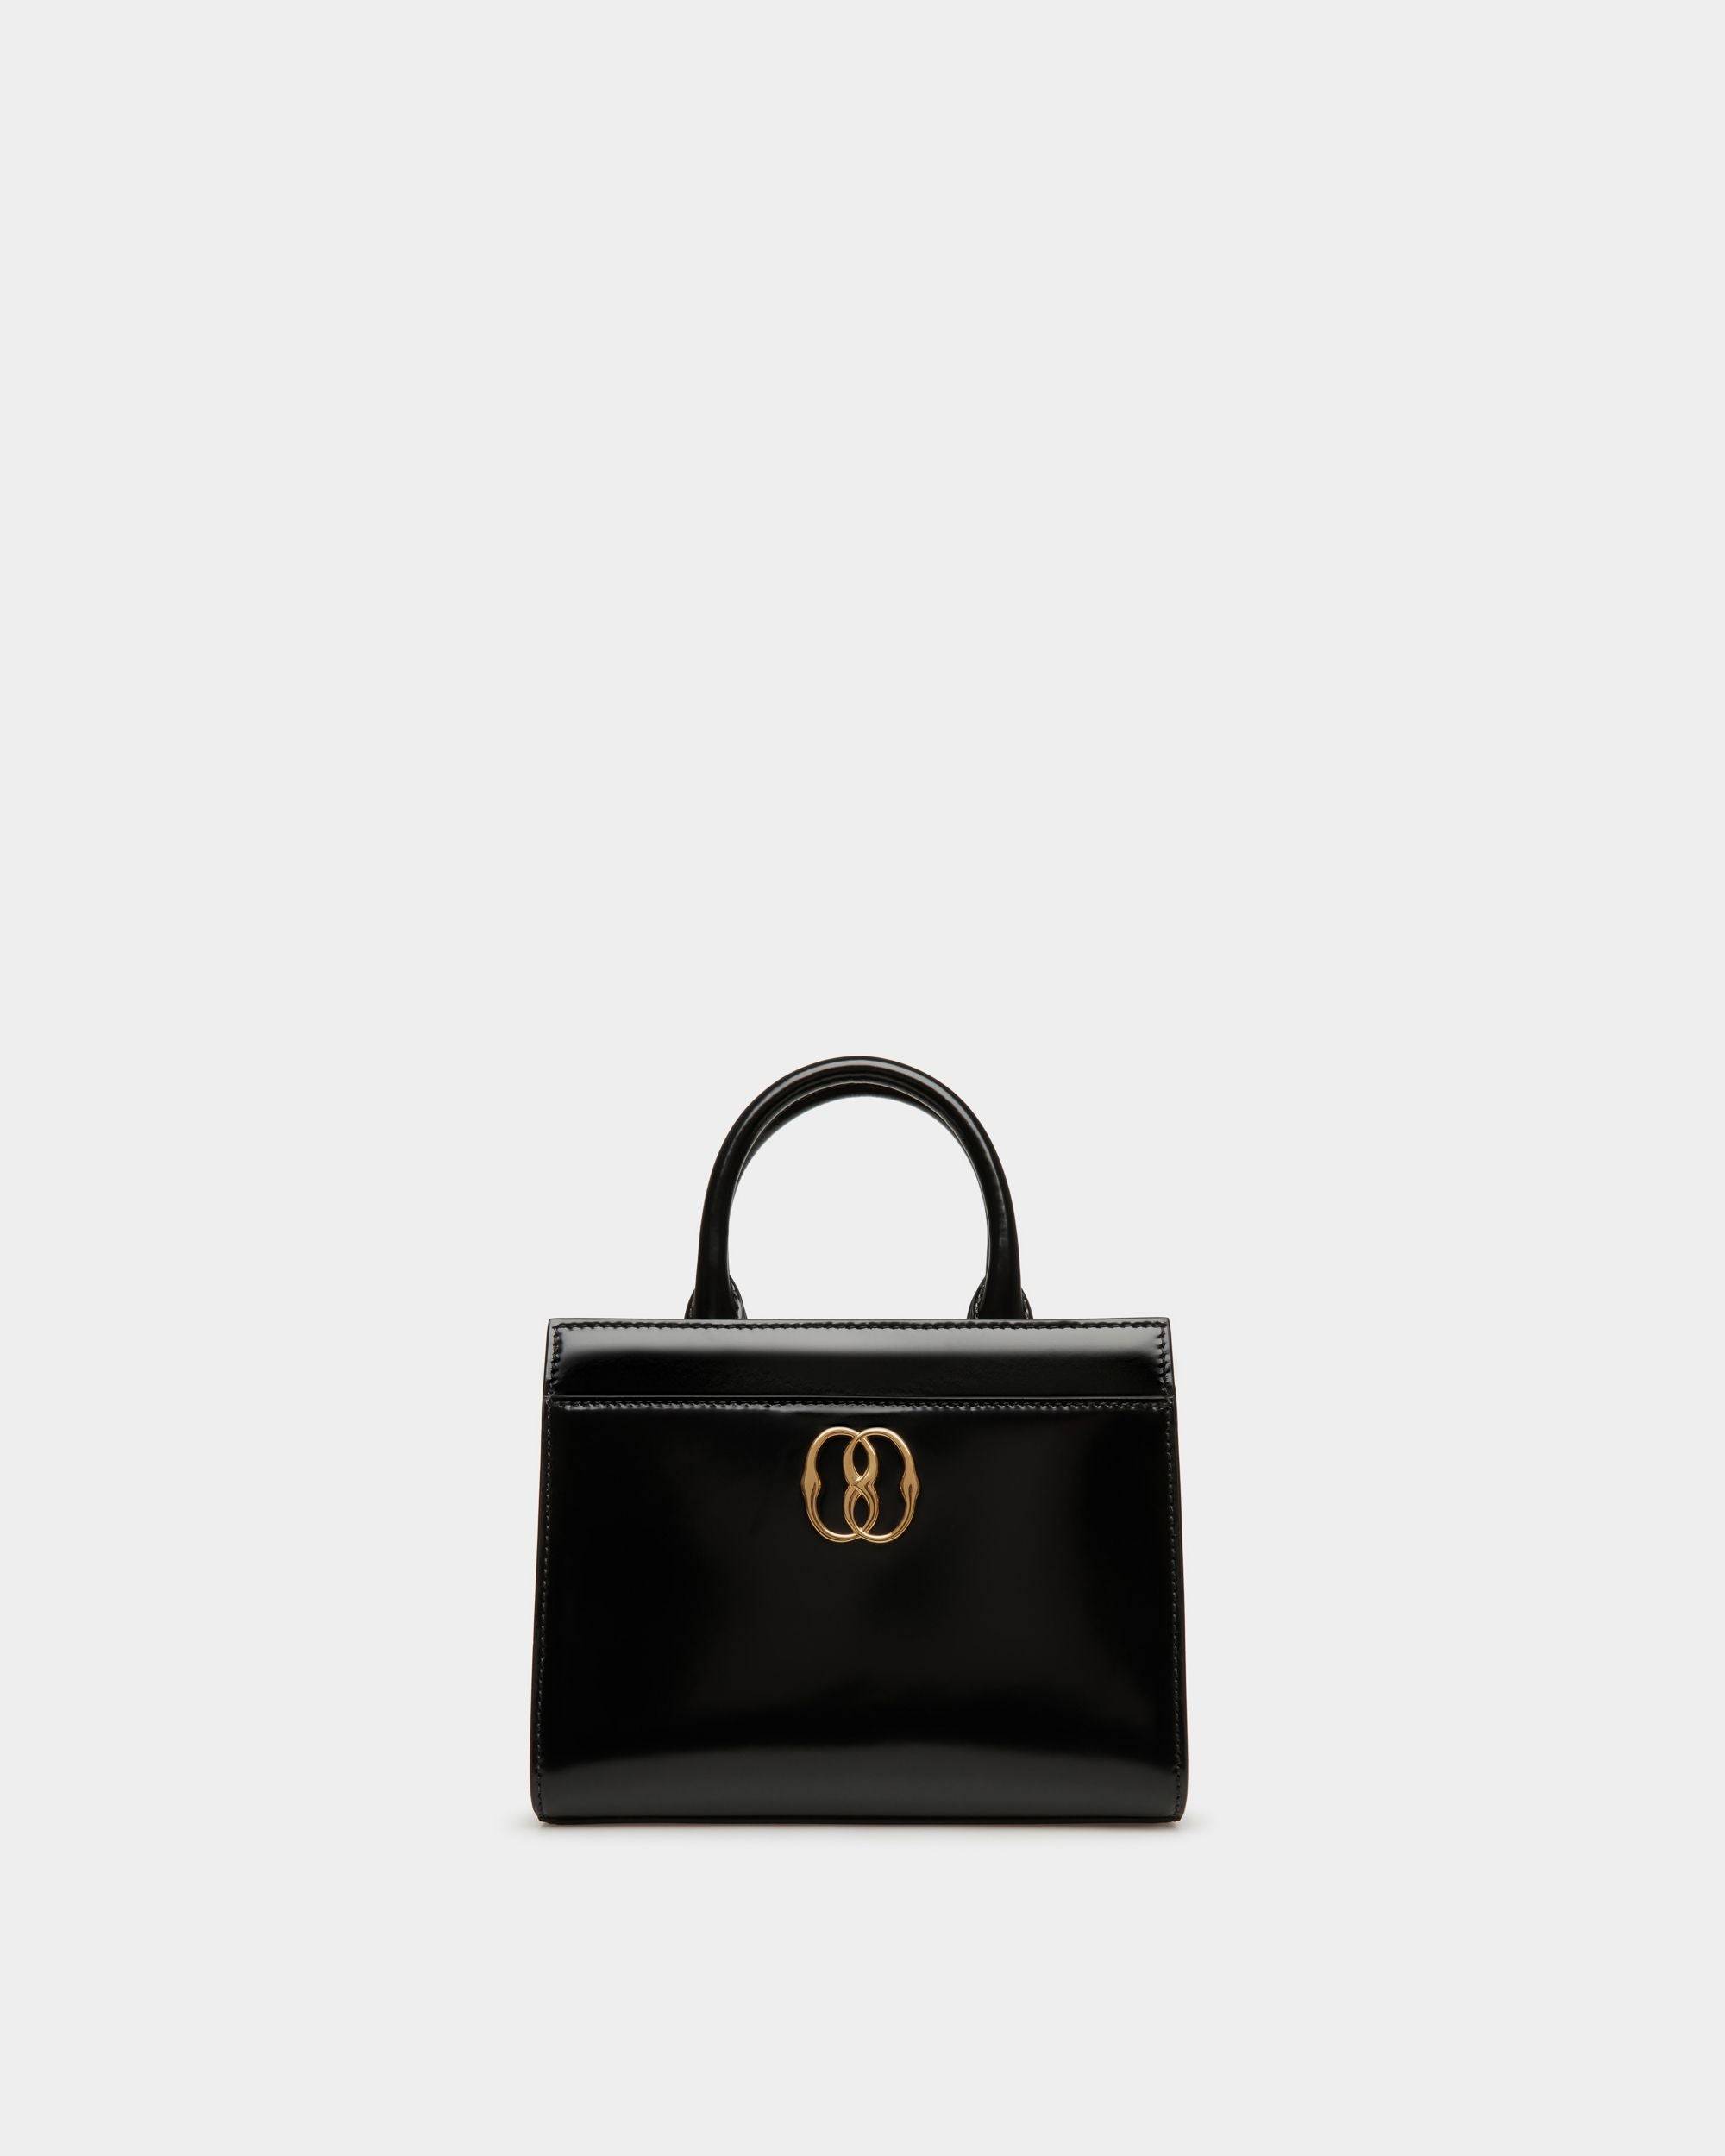 Emblem | Women's Small Tote Bag in Black Brushed Leather | Bally | Still Life Front